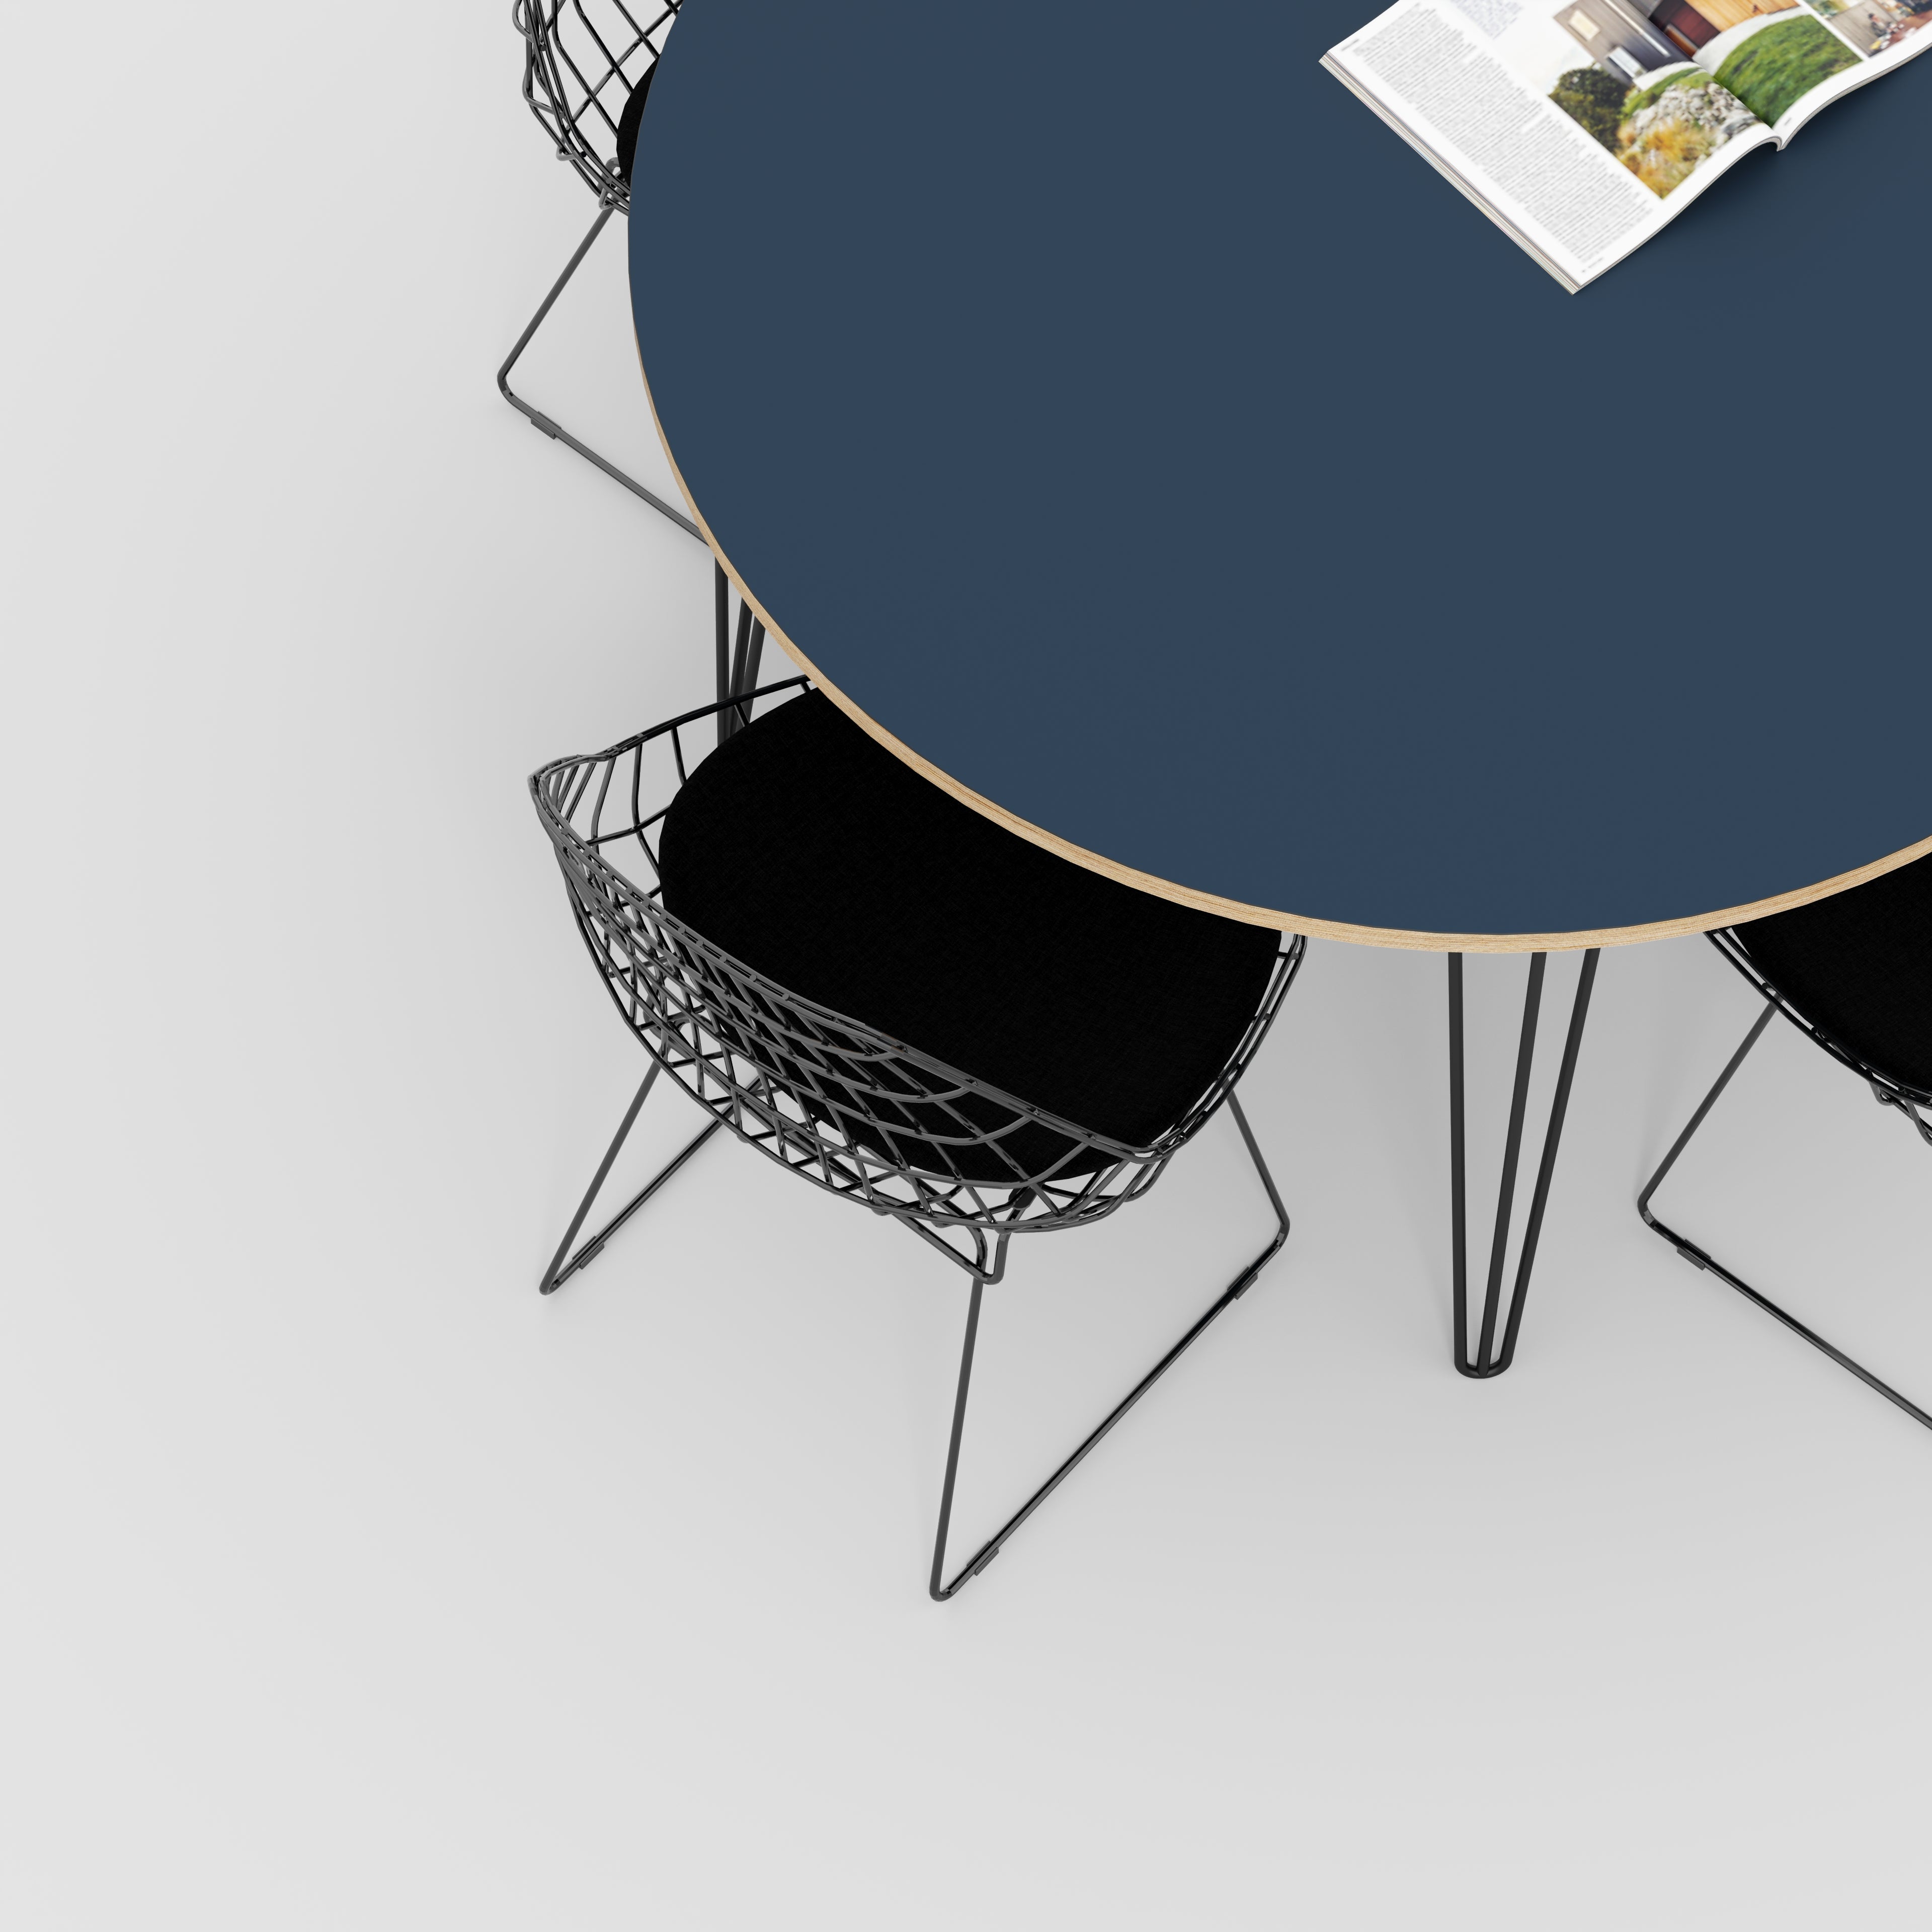 Round Table with Black Hairpin Legs - Formica Night Sea Blue - 1200(dia) x 735(h)